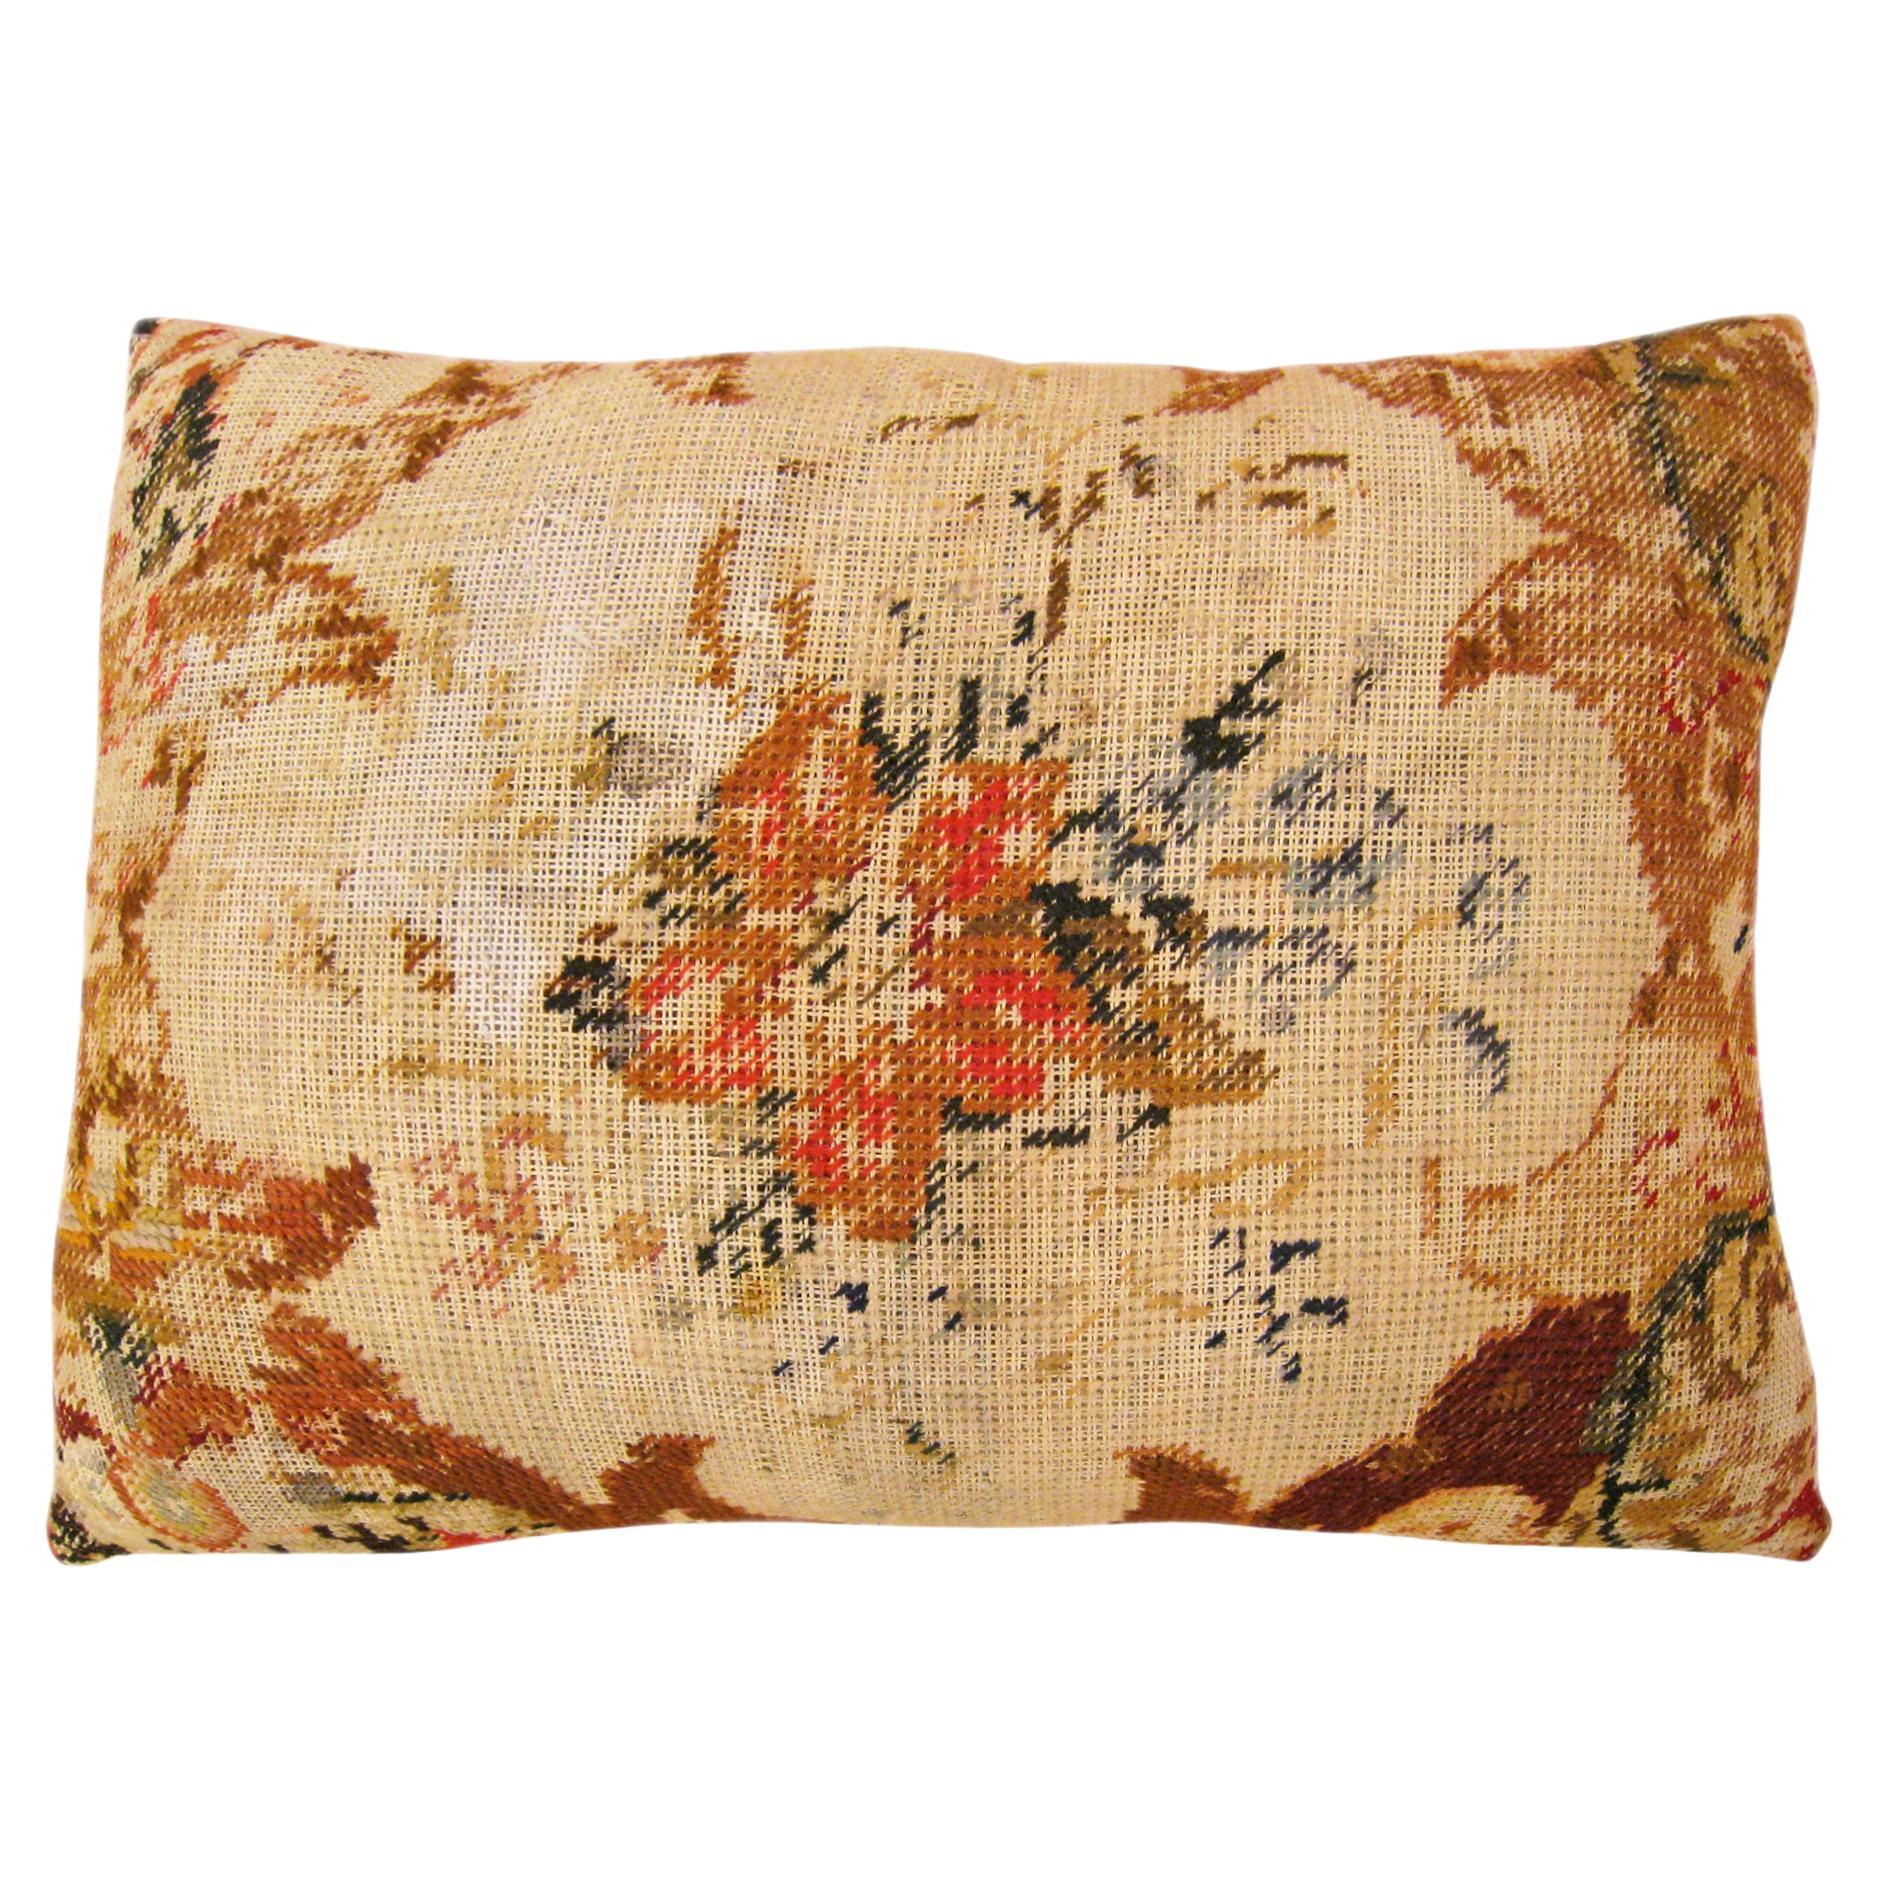  Antique Decorative English Needlepoint Rug Pillow with Floral Elements